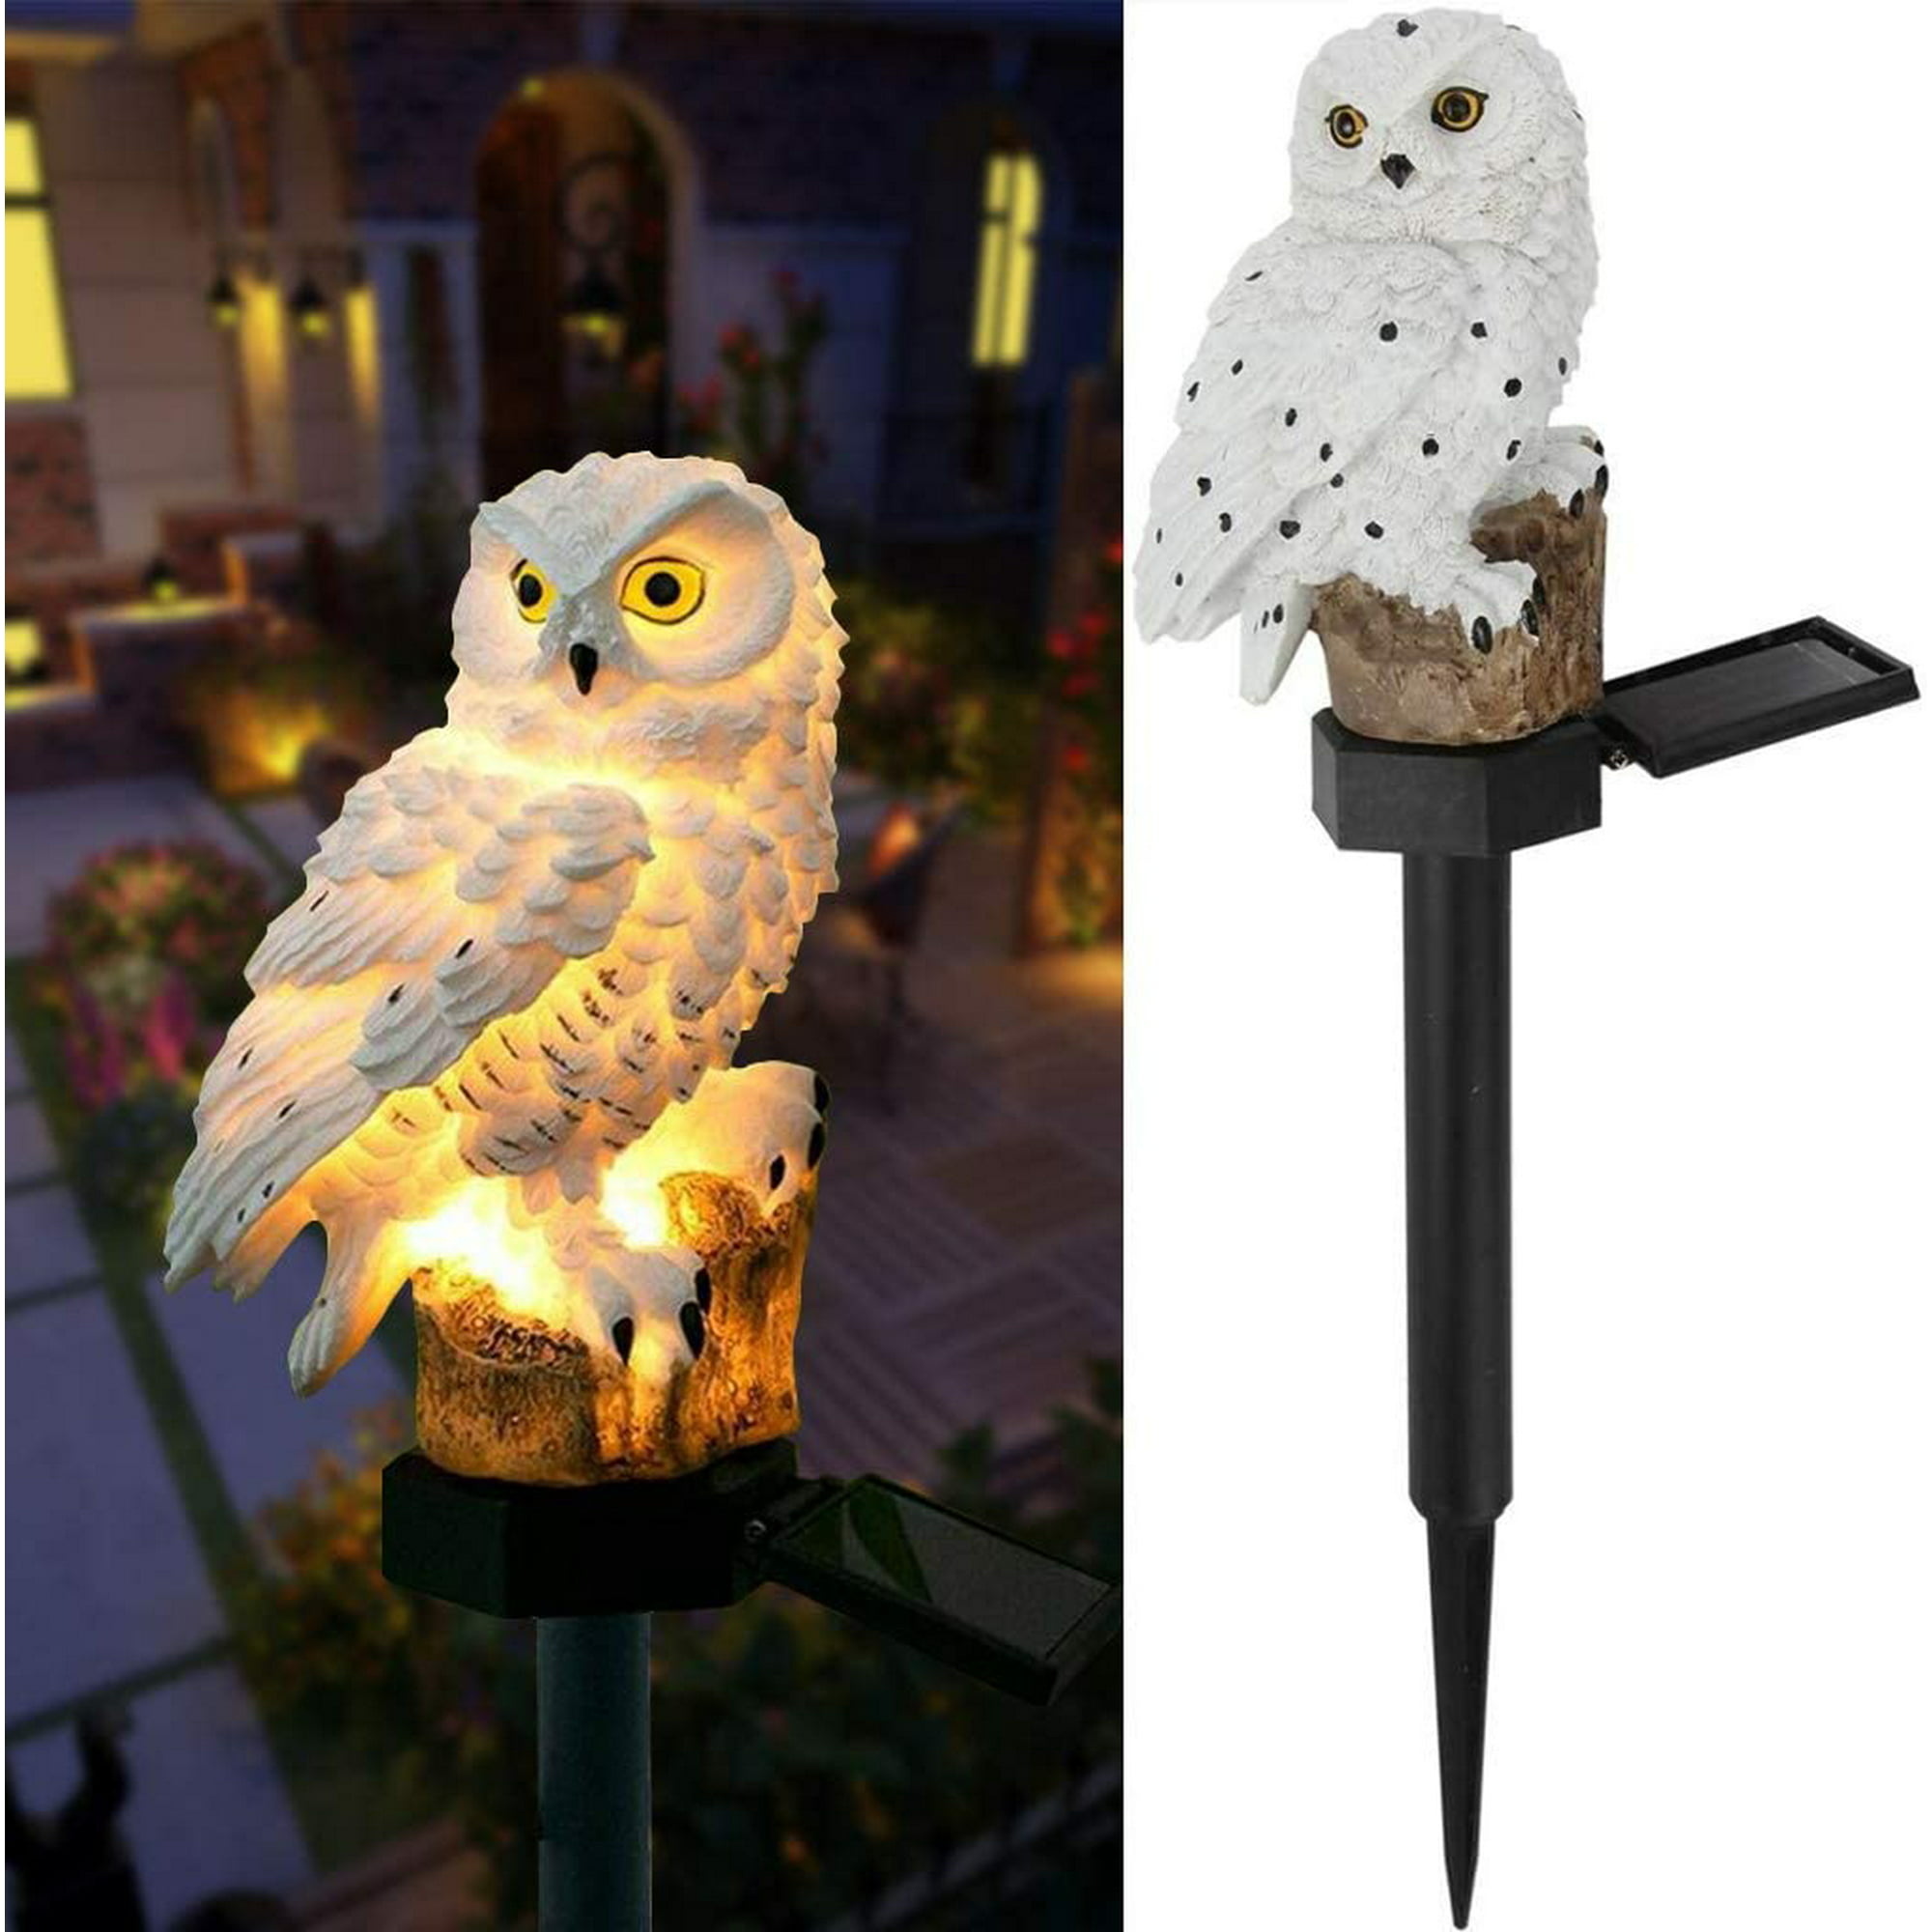 Garden Solar Lights Outdoor Decorative Resin Owl Solar LED Lights with Stake for Garden Lawn Pathway Yard Decortions - image 1 of 8